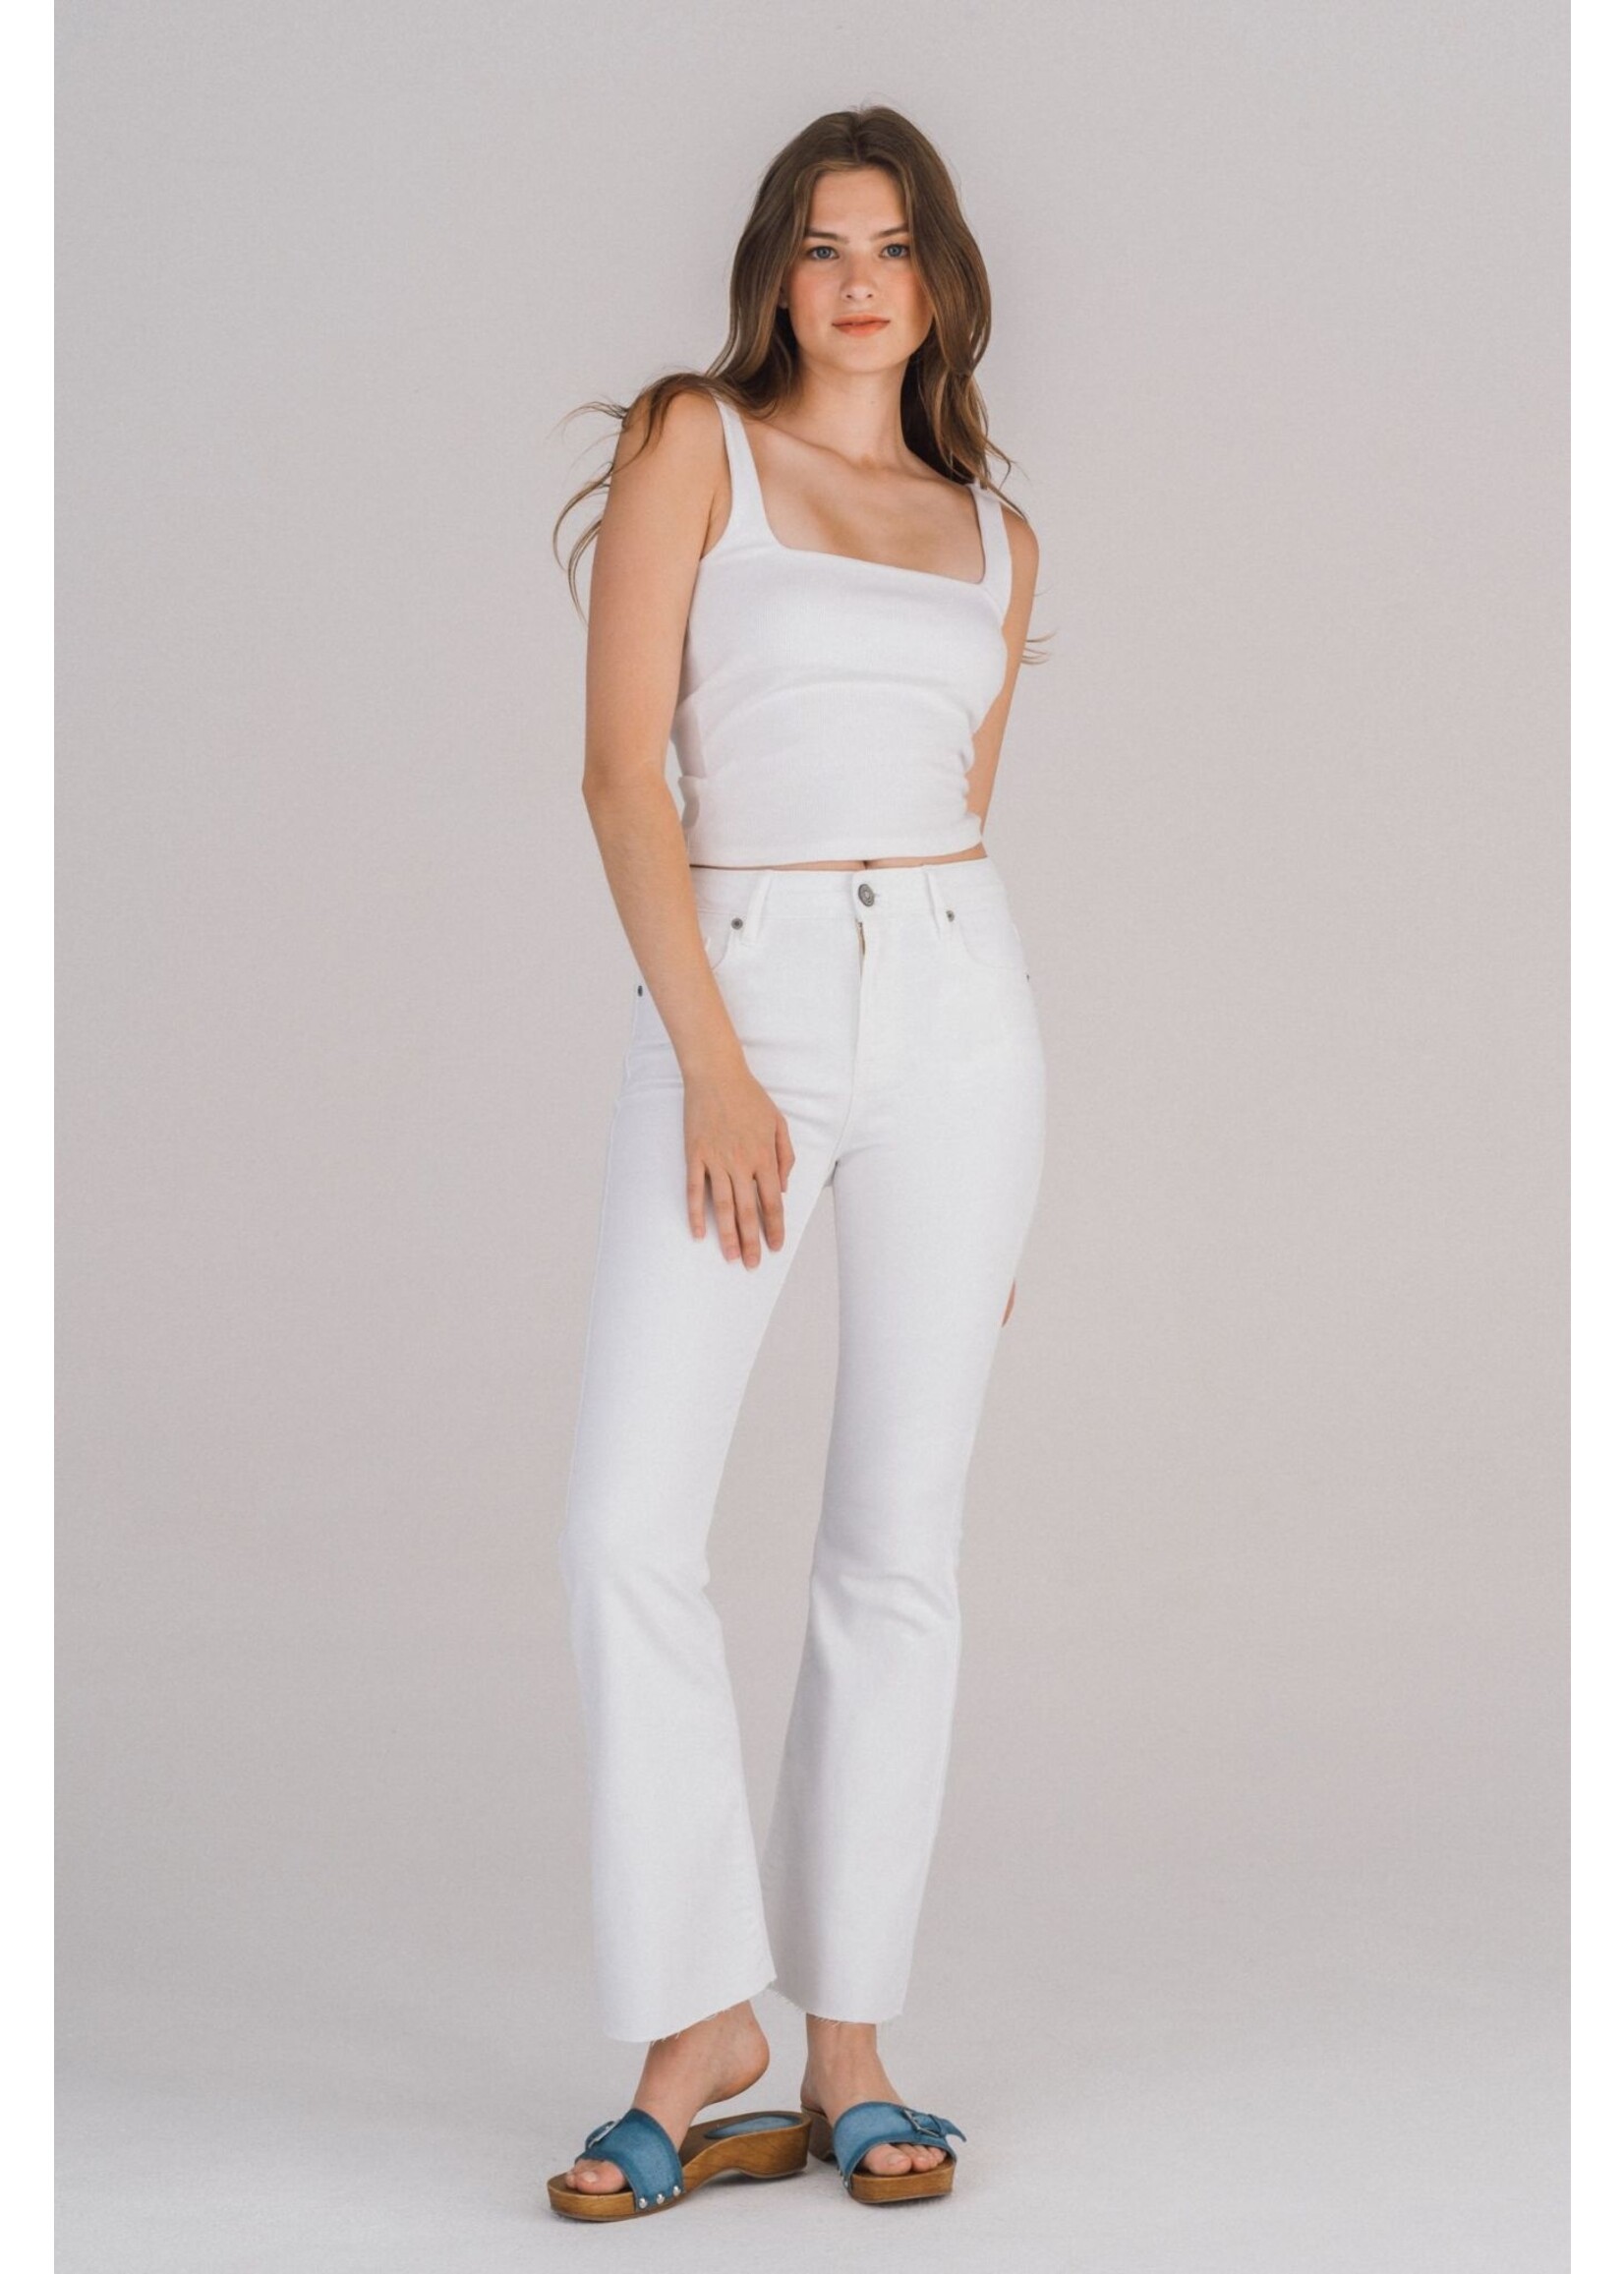 WHITE FLARE JEANS